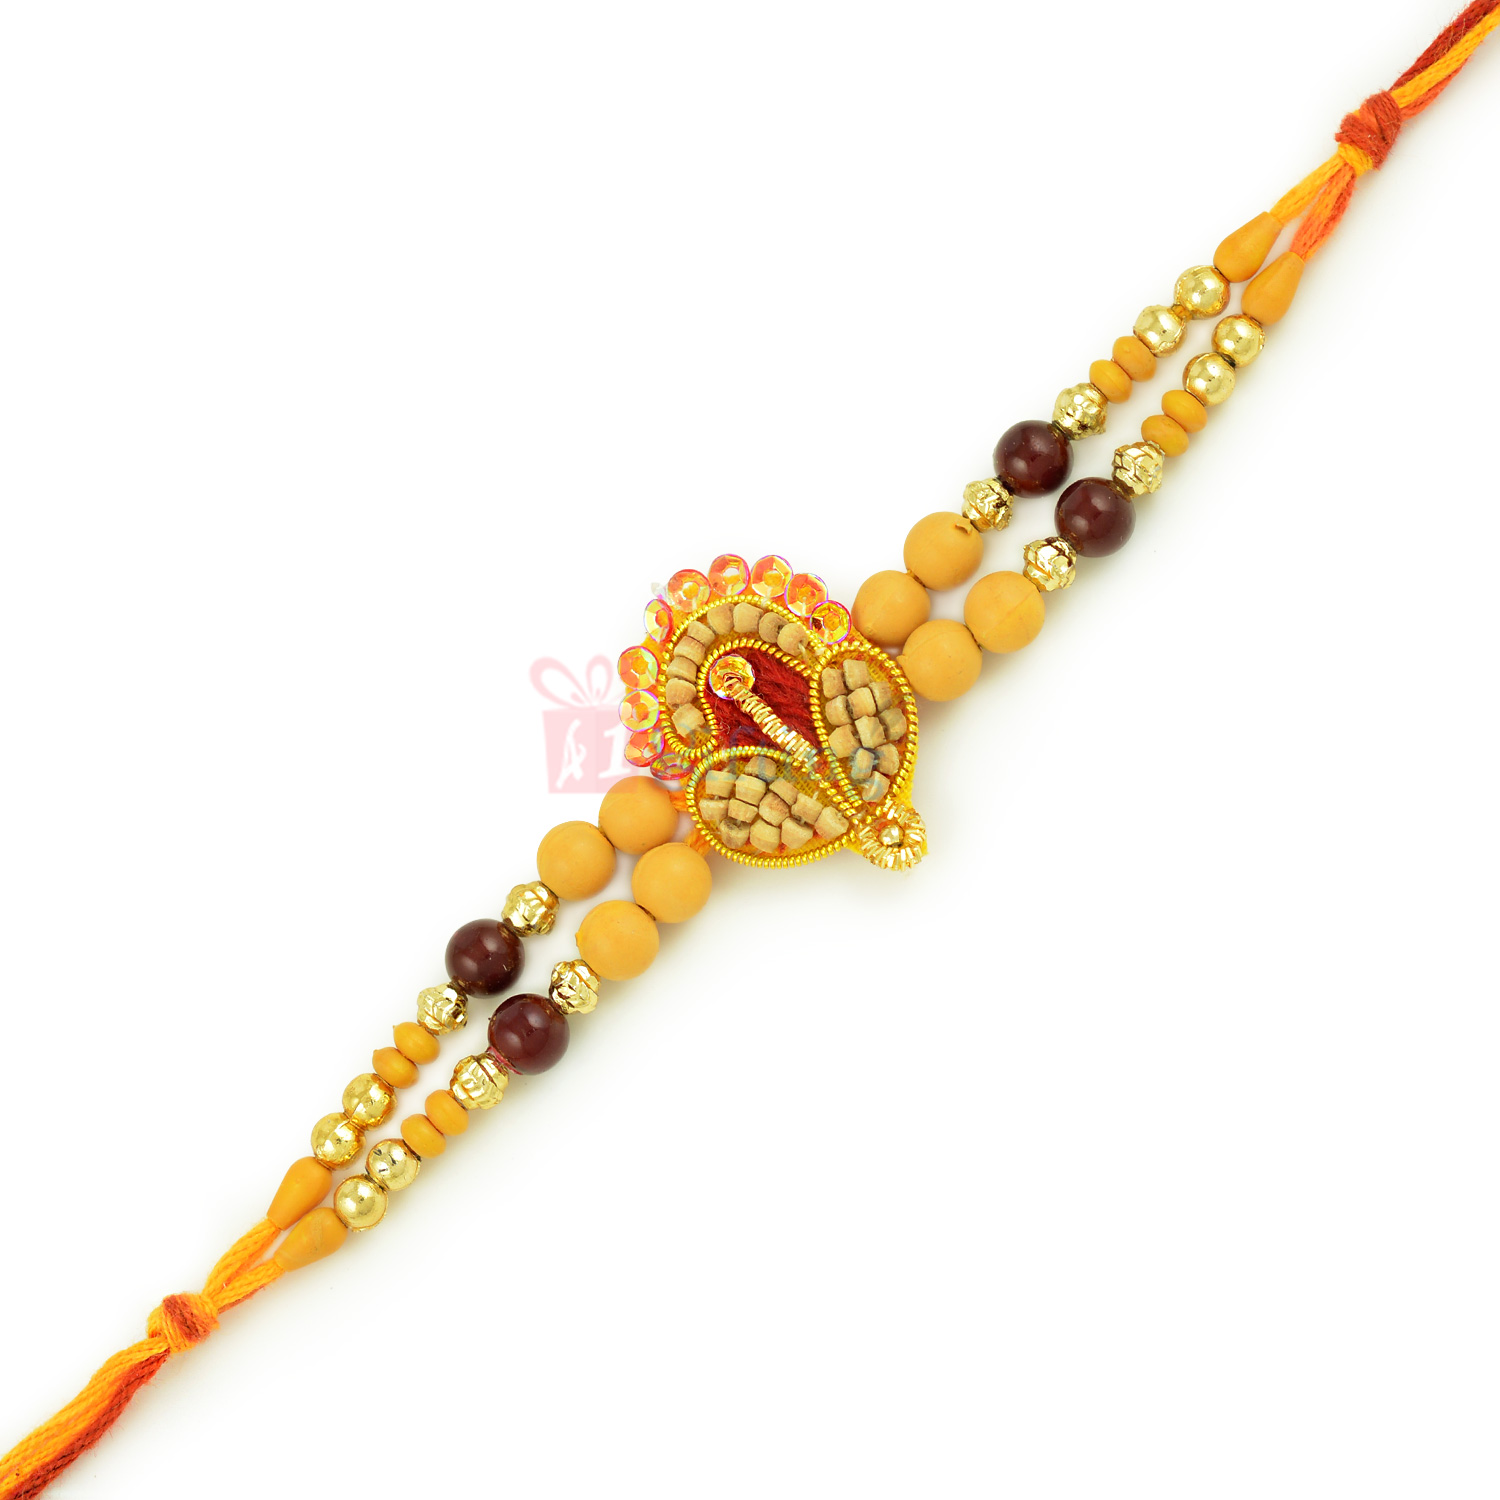 Wooden and Golden Beads Rakhi with Sandal Wood